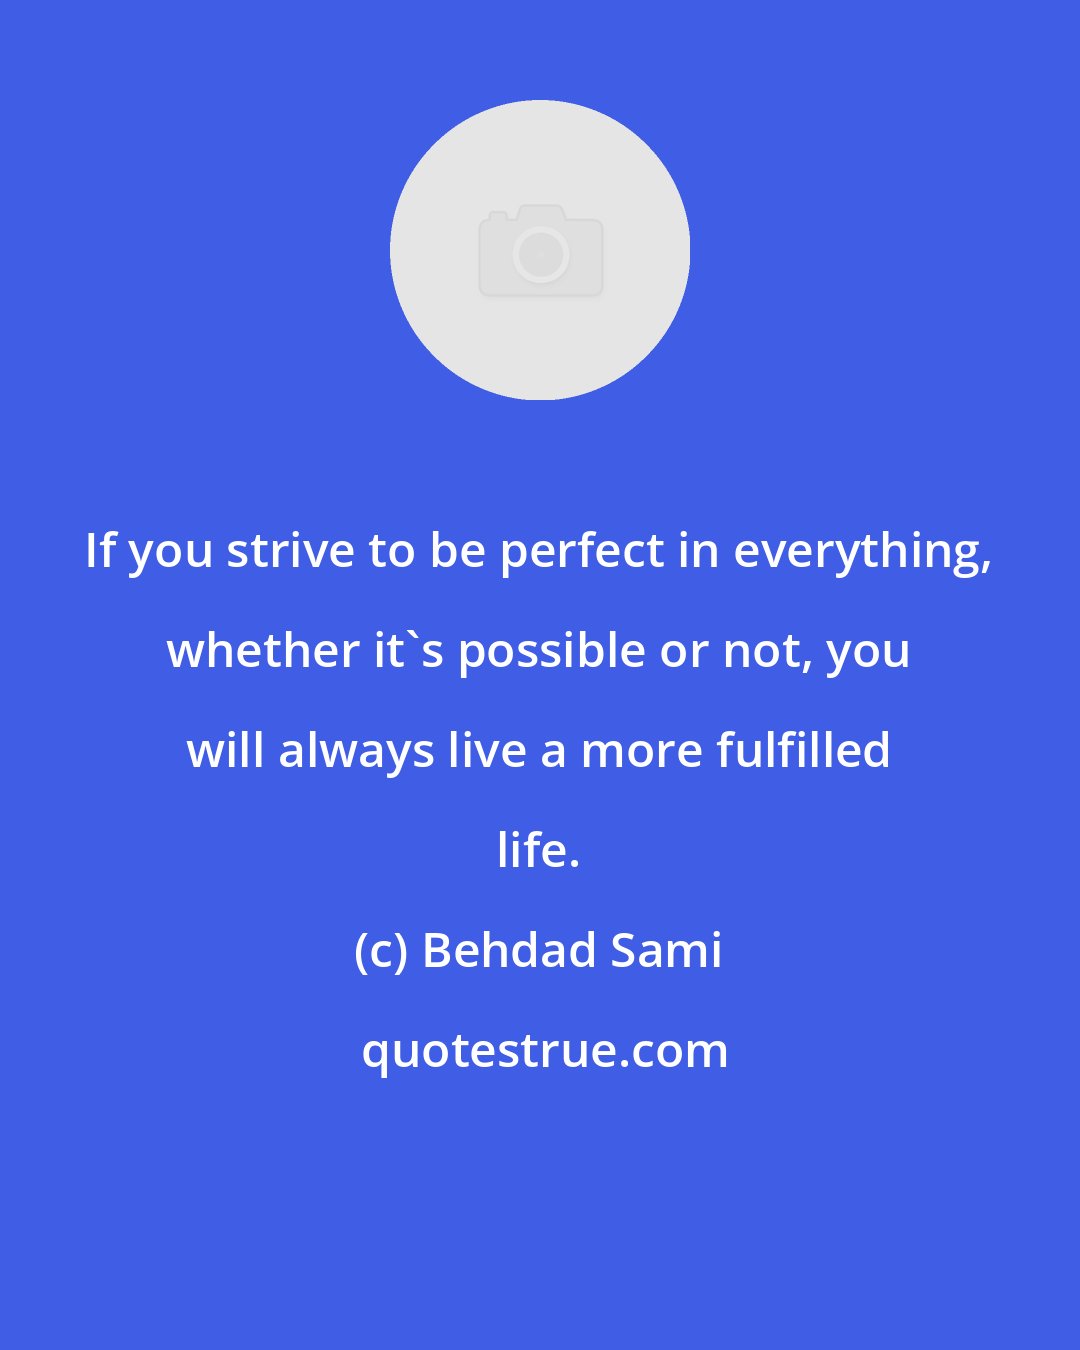 Behdad Sami: If you strive to be perfect in everything, whether it's possible or not, you will always live a more fulfilled life.